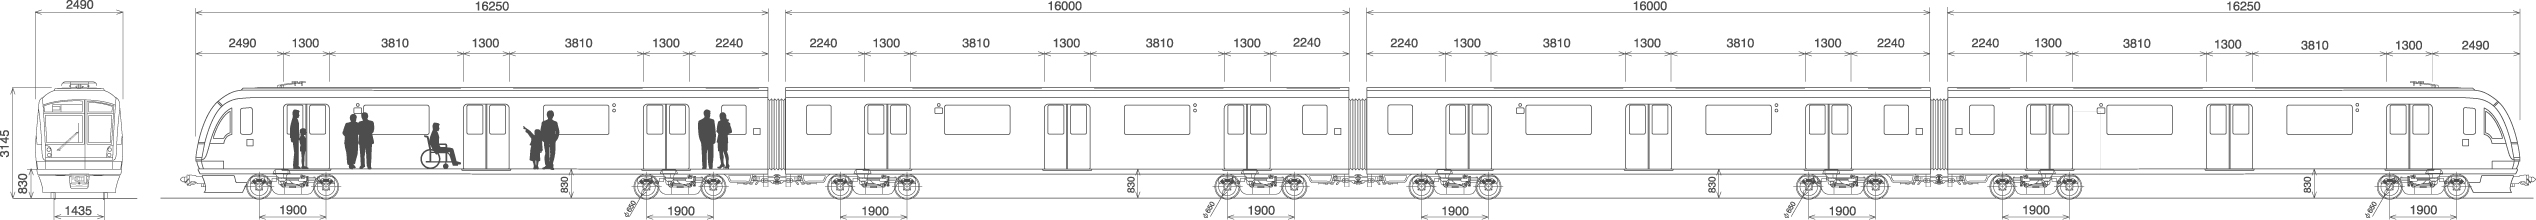 Dimensioned elevation of four car train with figures of differing physical abilities for scale.